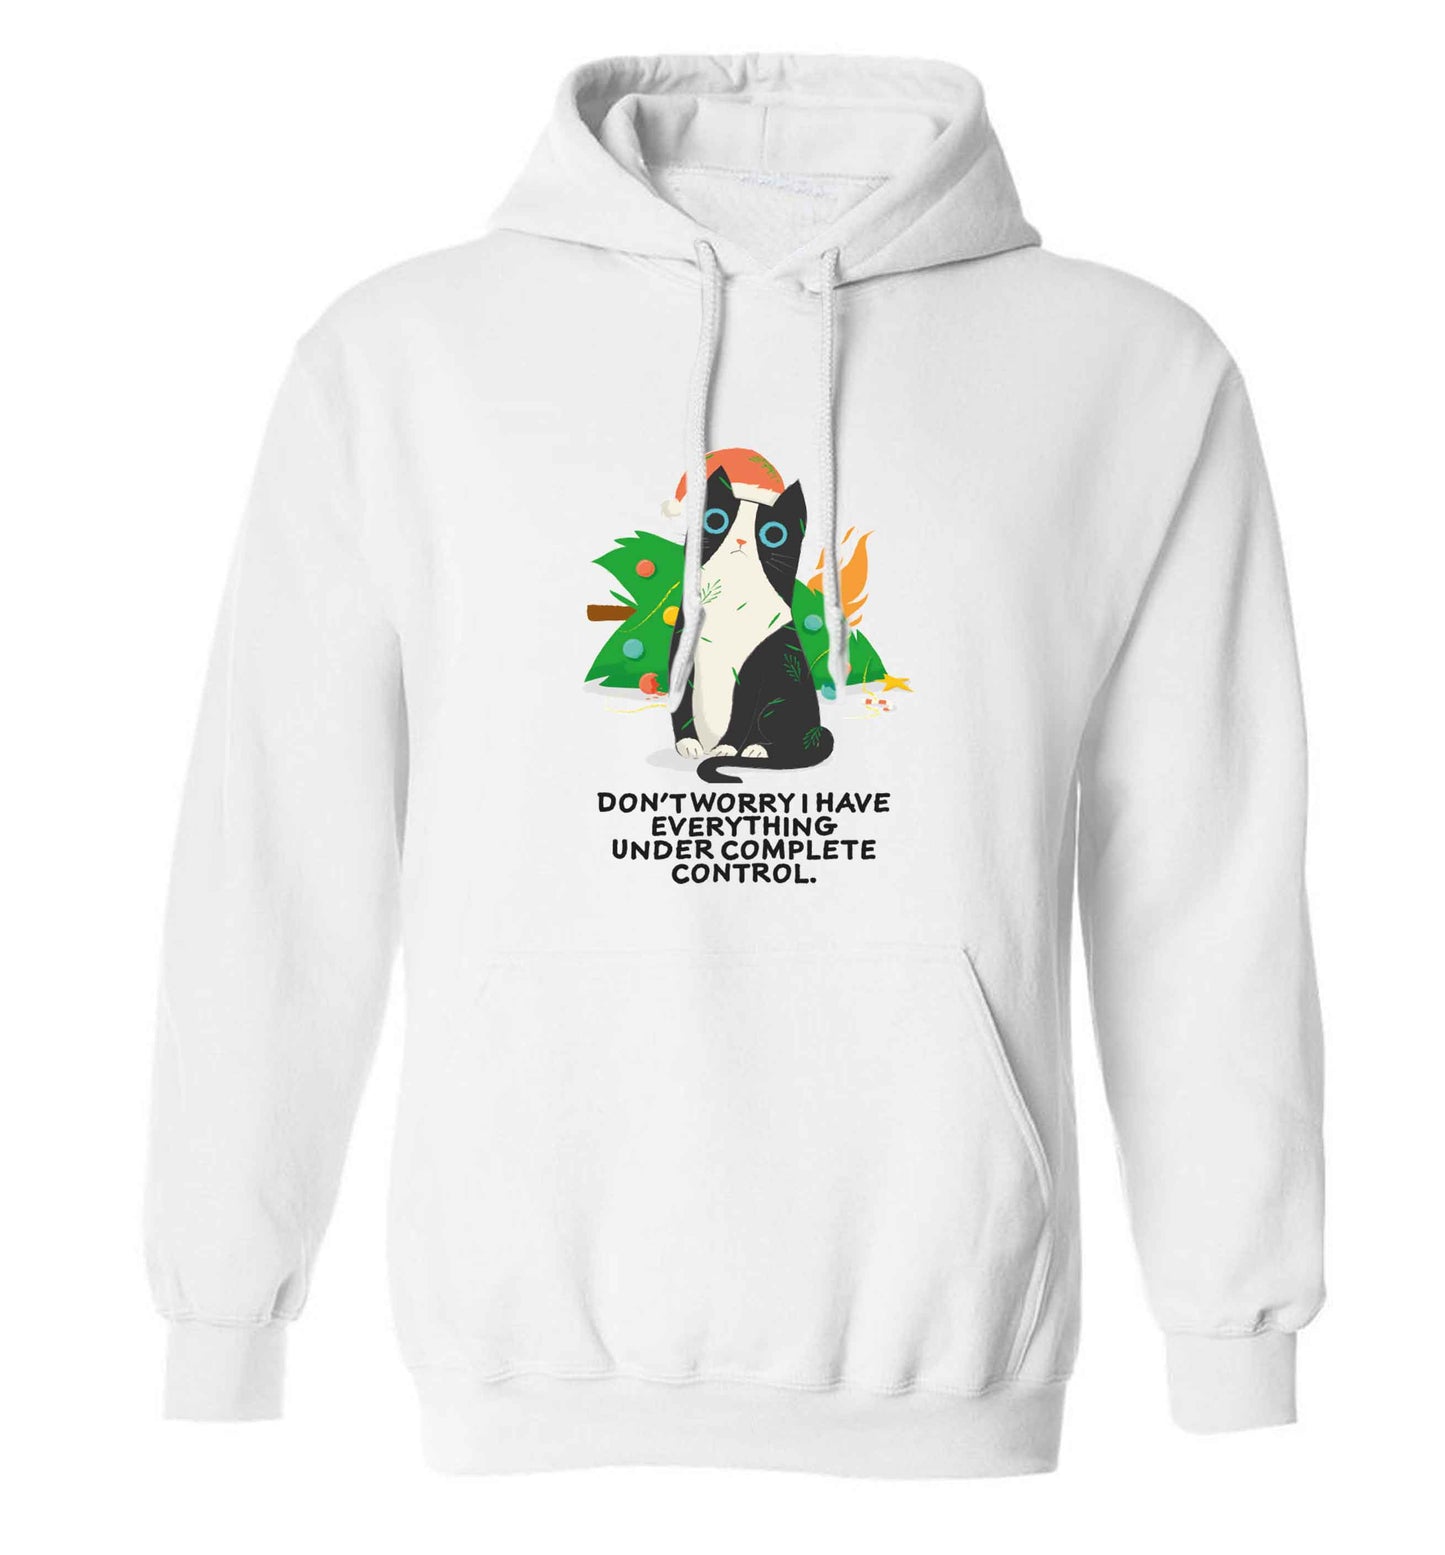 Don't worry I have everything under complete control adults unisex white hoodie 2XL